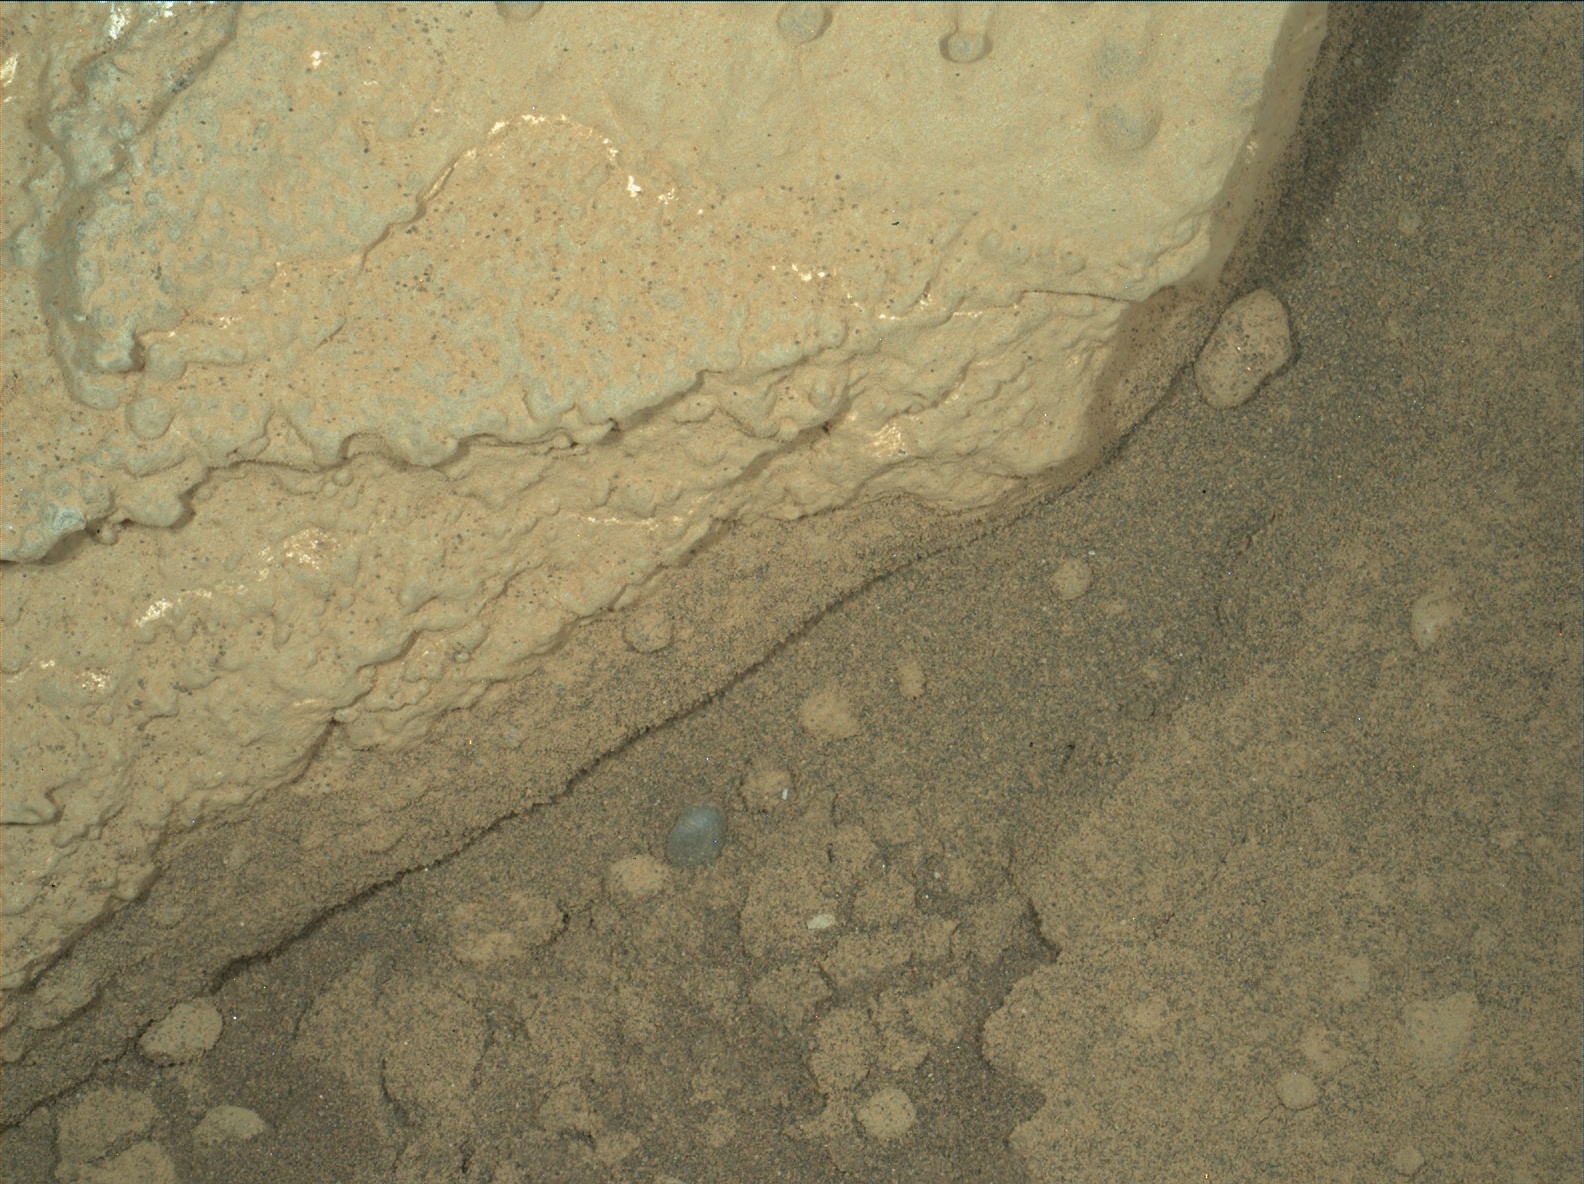 Nasa's Mars rover Curiosity acquired this image using its Mars Hand Lens Imager (MAHLI) on Sol 293